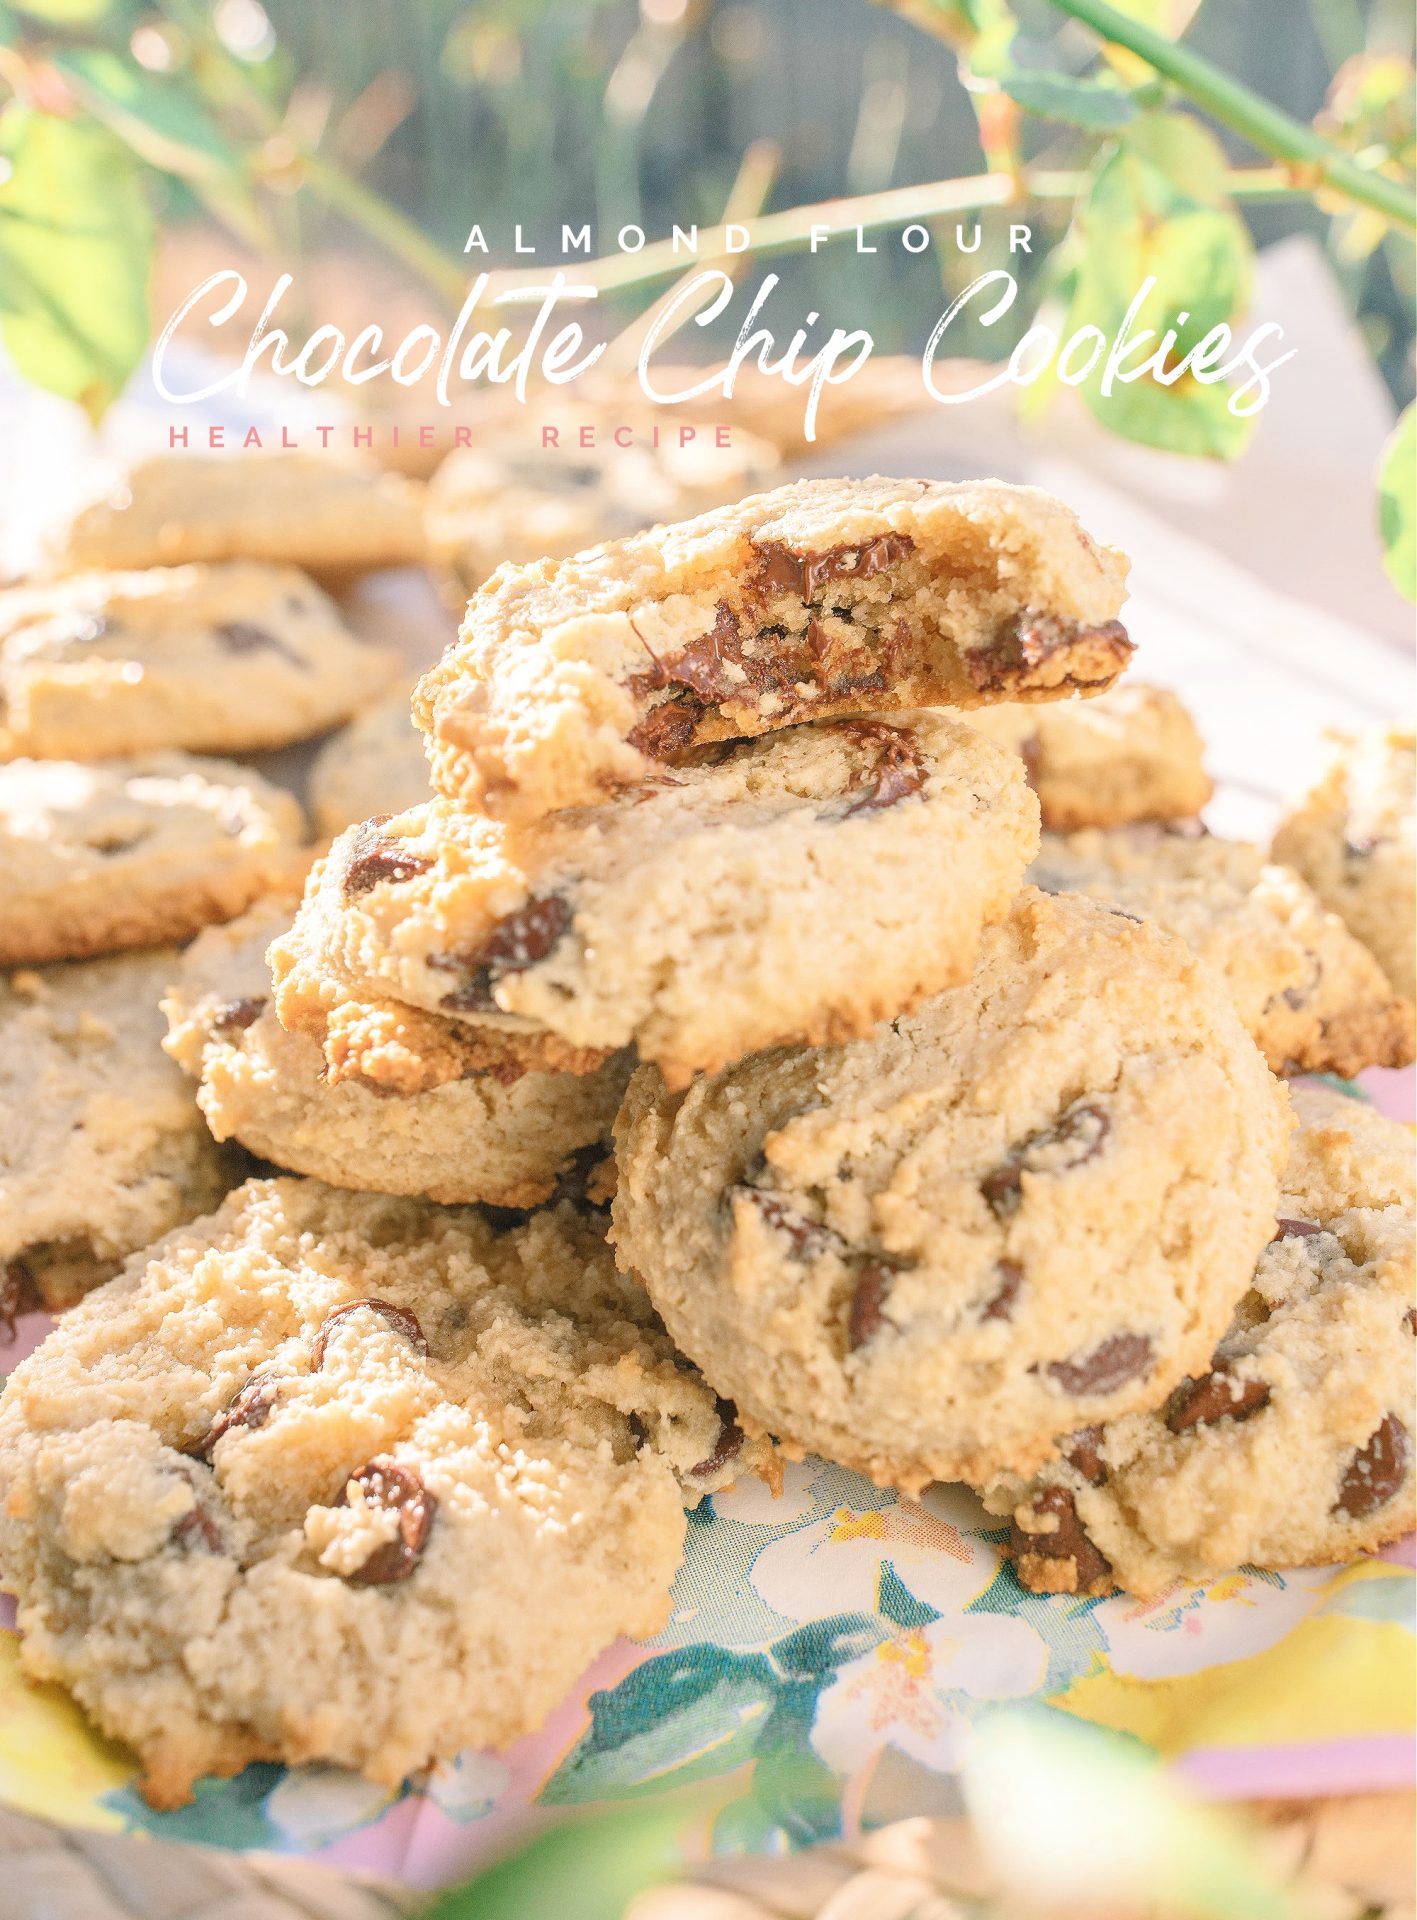 healthy chocolate chip cookies, almond flour chocolate chip cookies, low carb chocolate chip cookies, grain free chocolate chip cookies, dairy free chocolate chip cookies, paleo chocolate chip cookies, healthy cookies for kids, healthy desserts, healthy baking, almond flour recipe, low carb recipes, gluten free chocolate chip cookies, gluten free dessert, eating healthier, diet friendly desserts, homemade girl scout cookies, national weight loss month, healthy on valentines day, eat healthy Super Bowl foods, clean eating recipes 